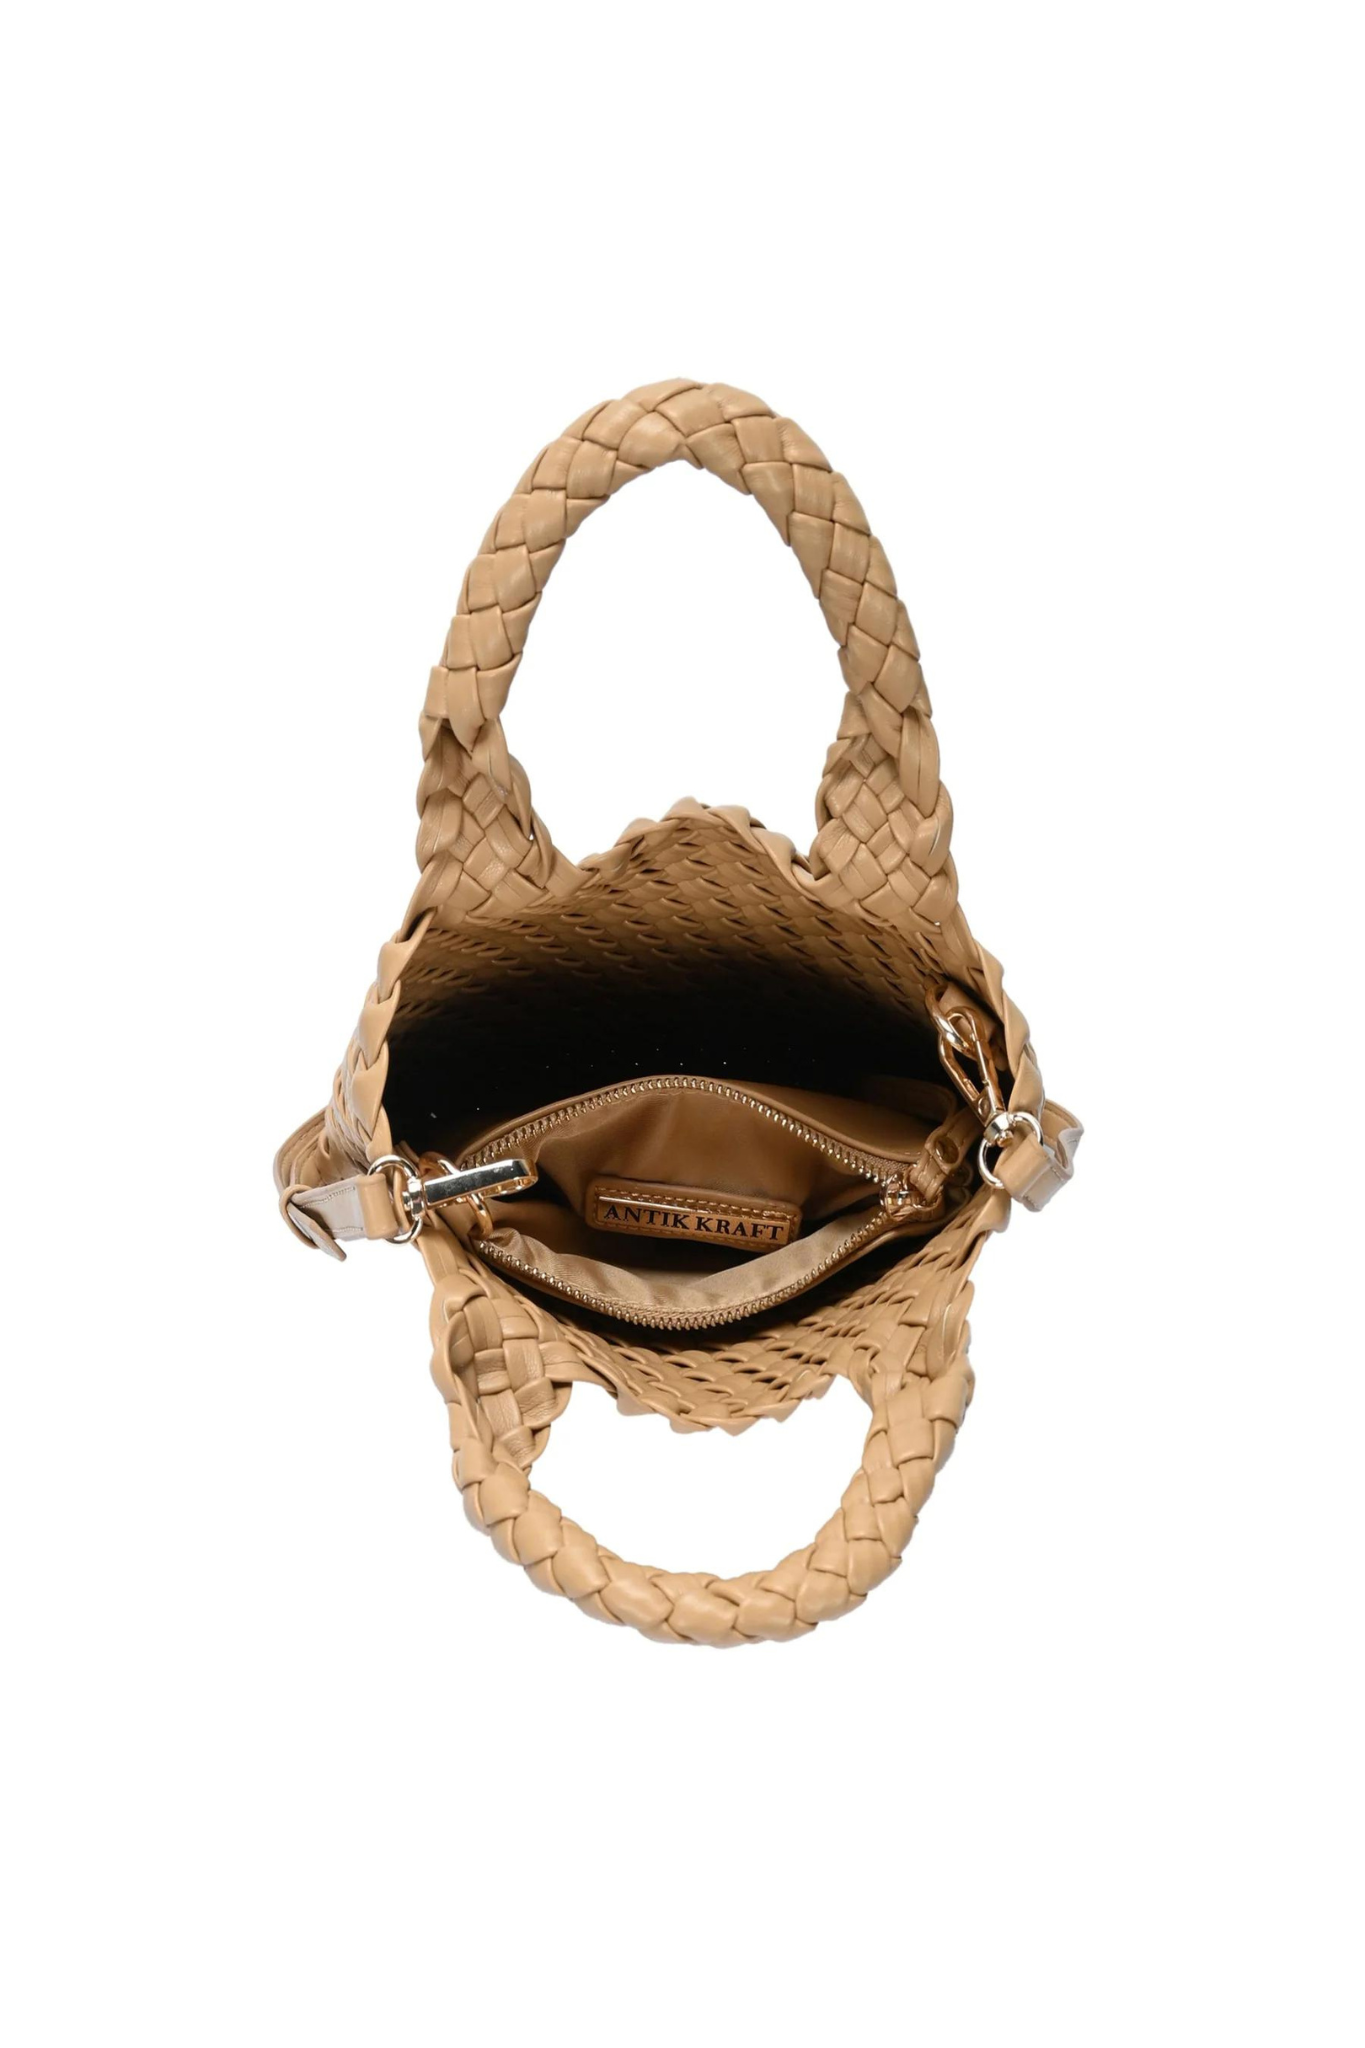 2 in 1 Woven Handle Tote Bag with Clutch Set in Tan_Interior